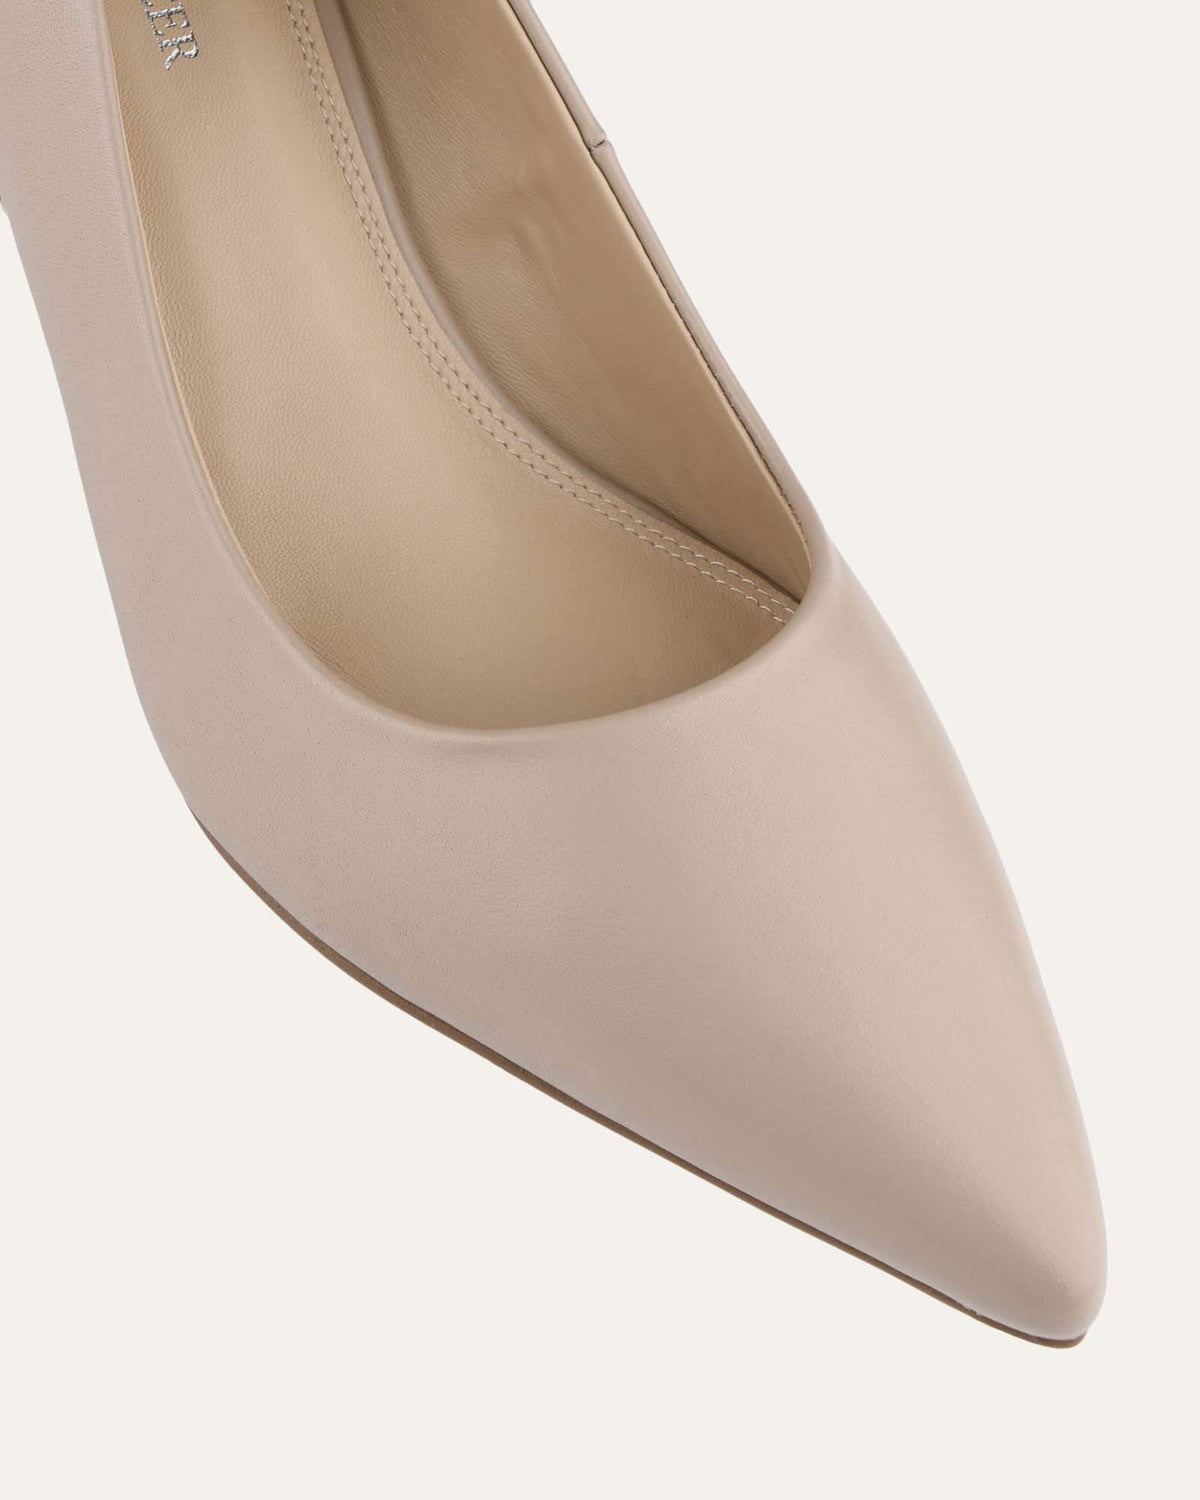 CARRINGTON LOW HEELS TAUPE LEATHER